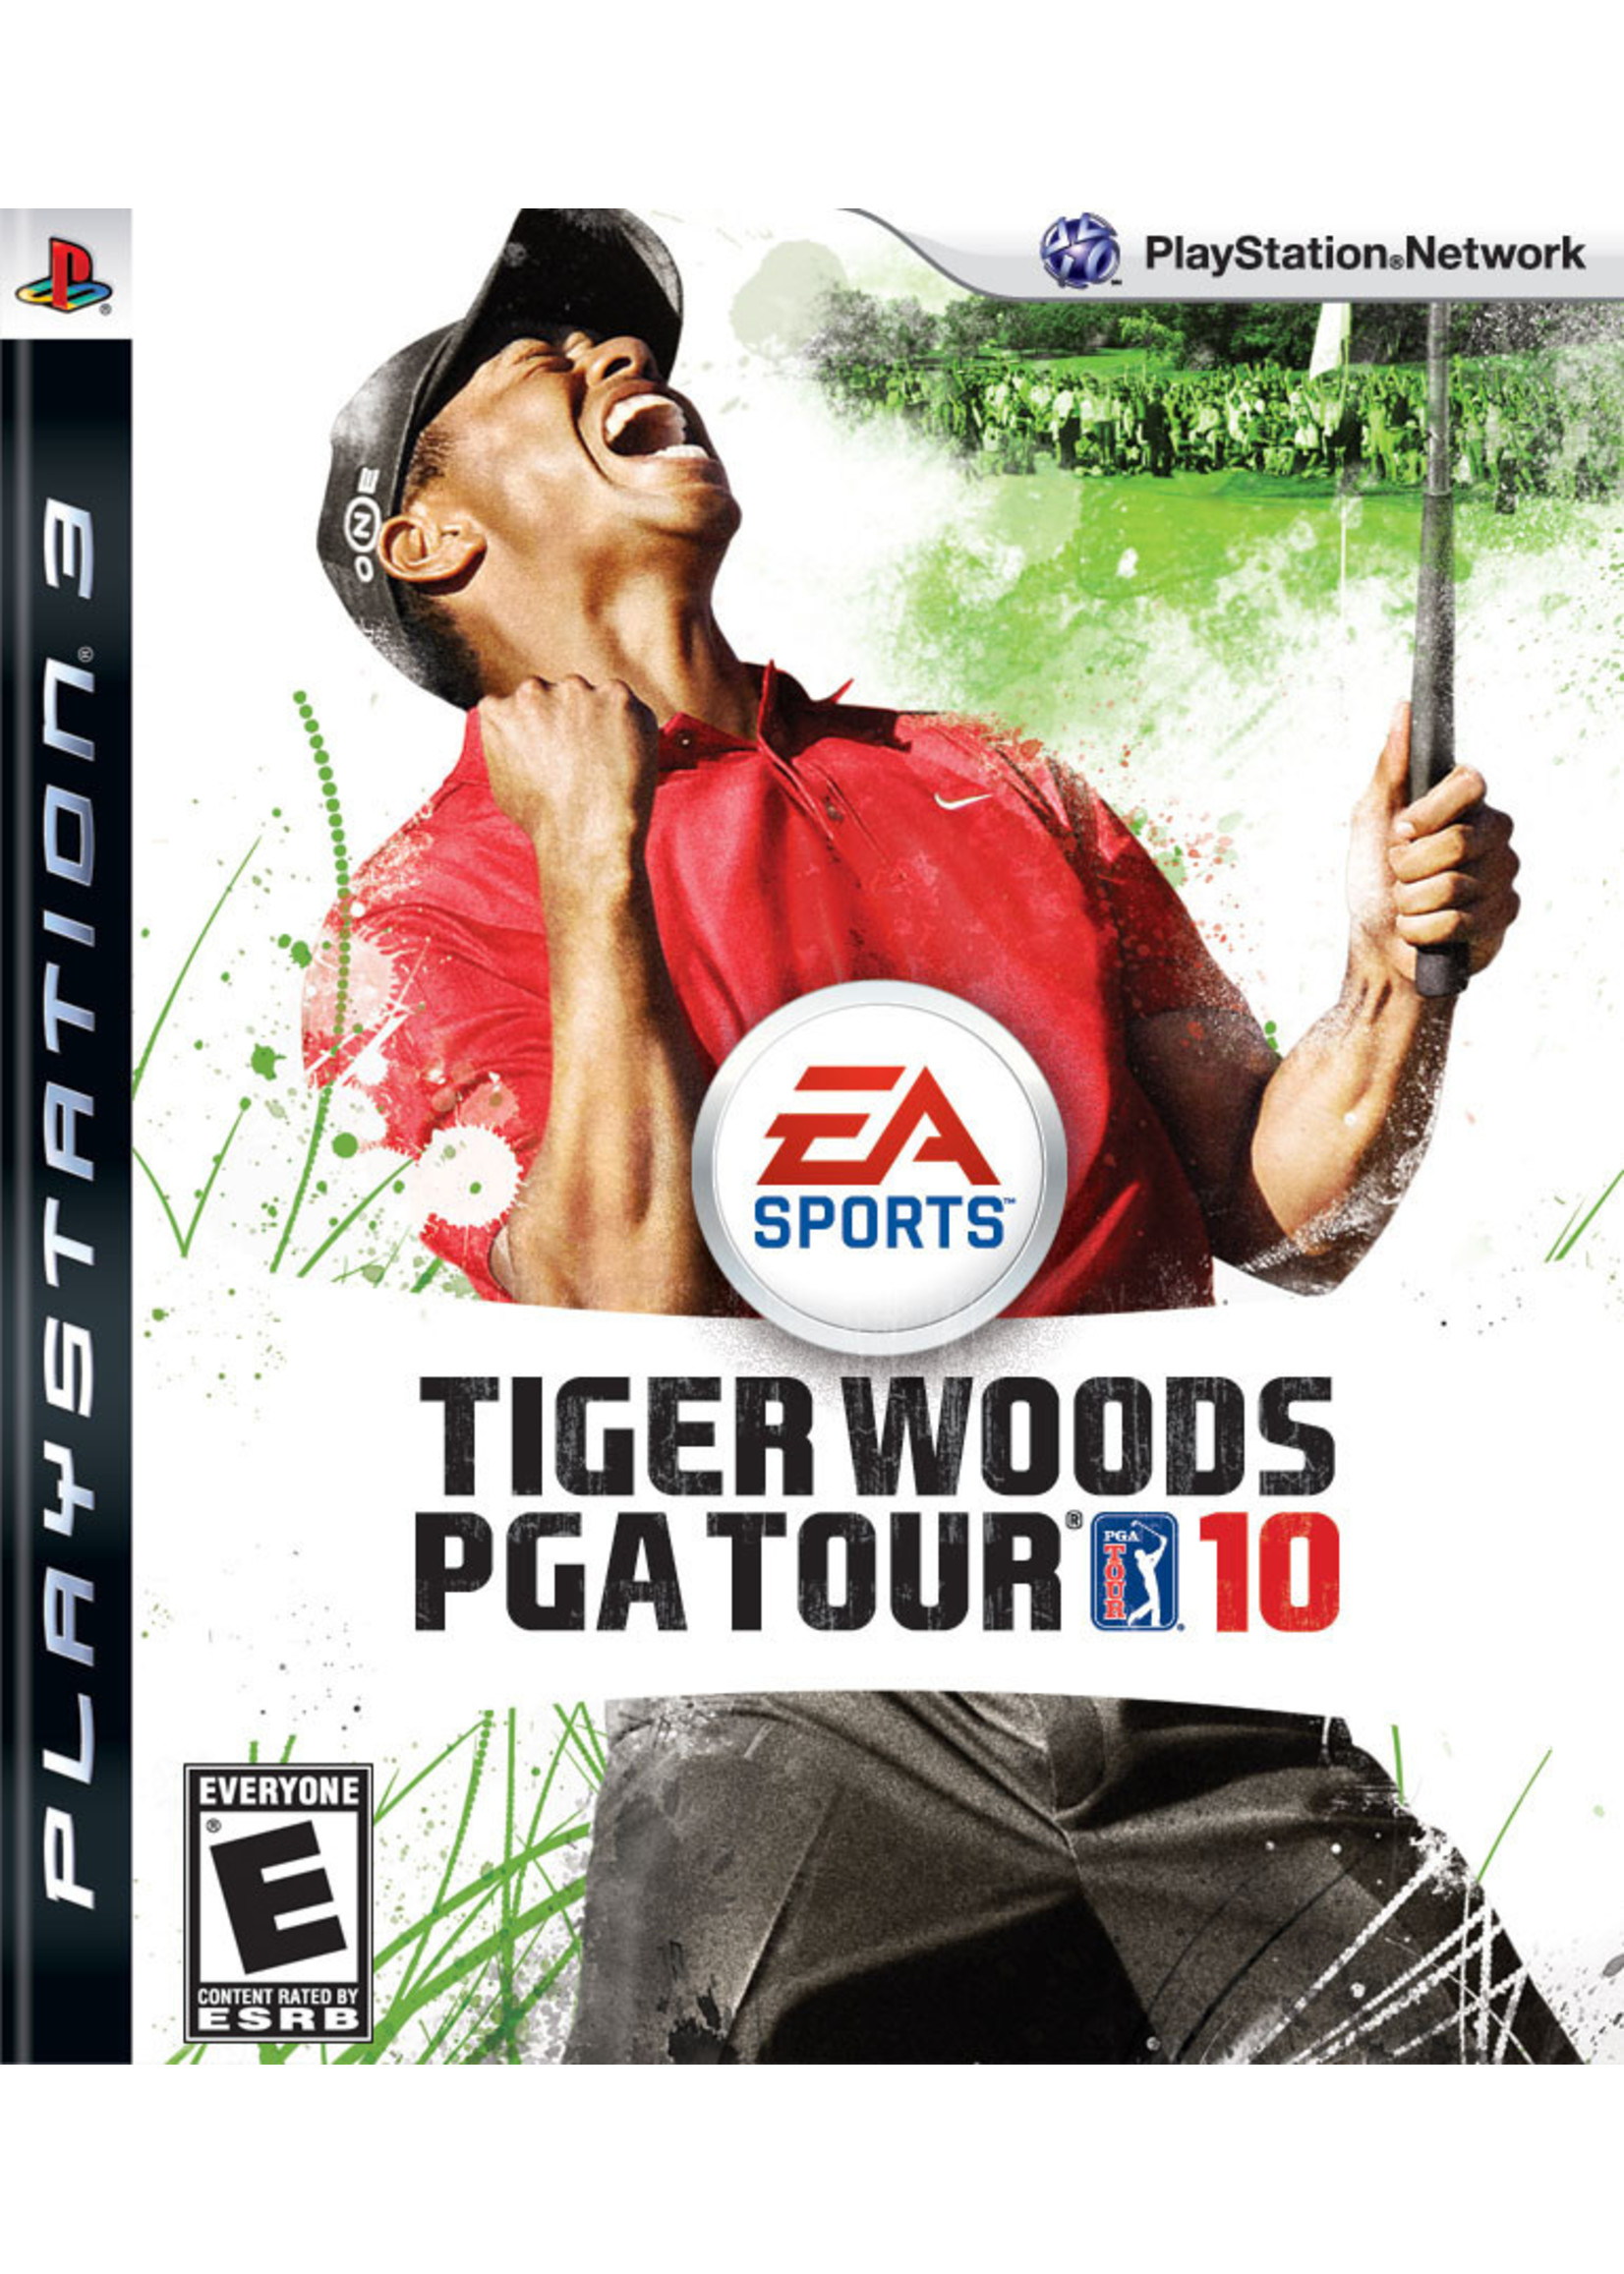 Sony Playstation 3 (PS3) Tiger Woods PGA Tour 2010